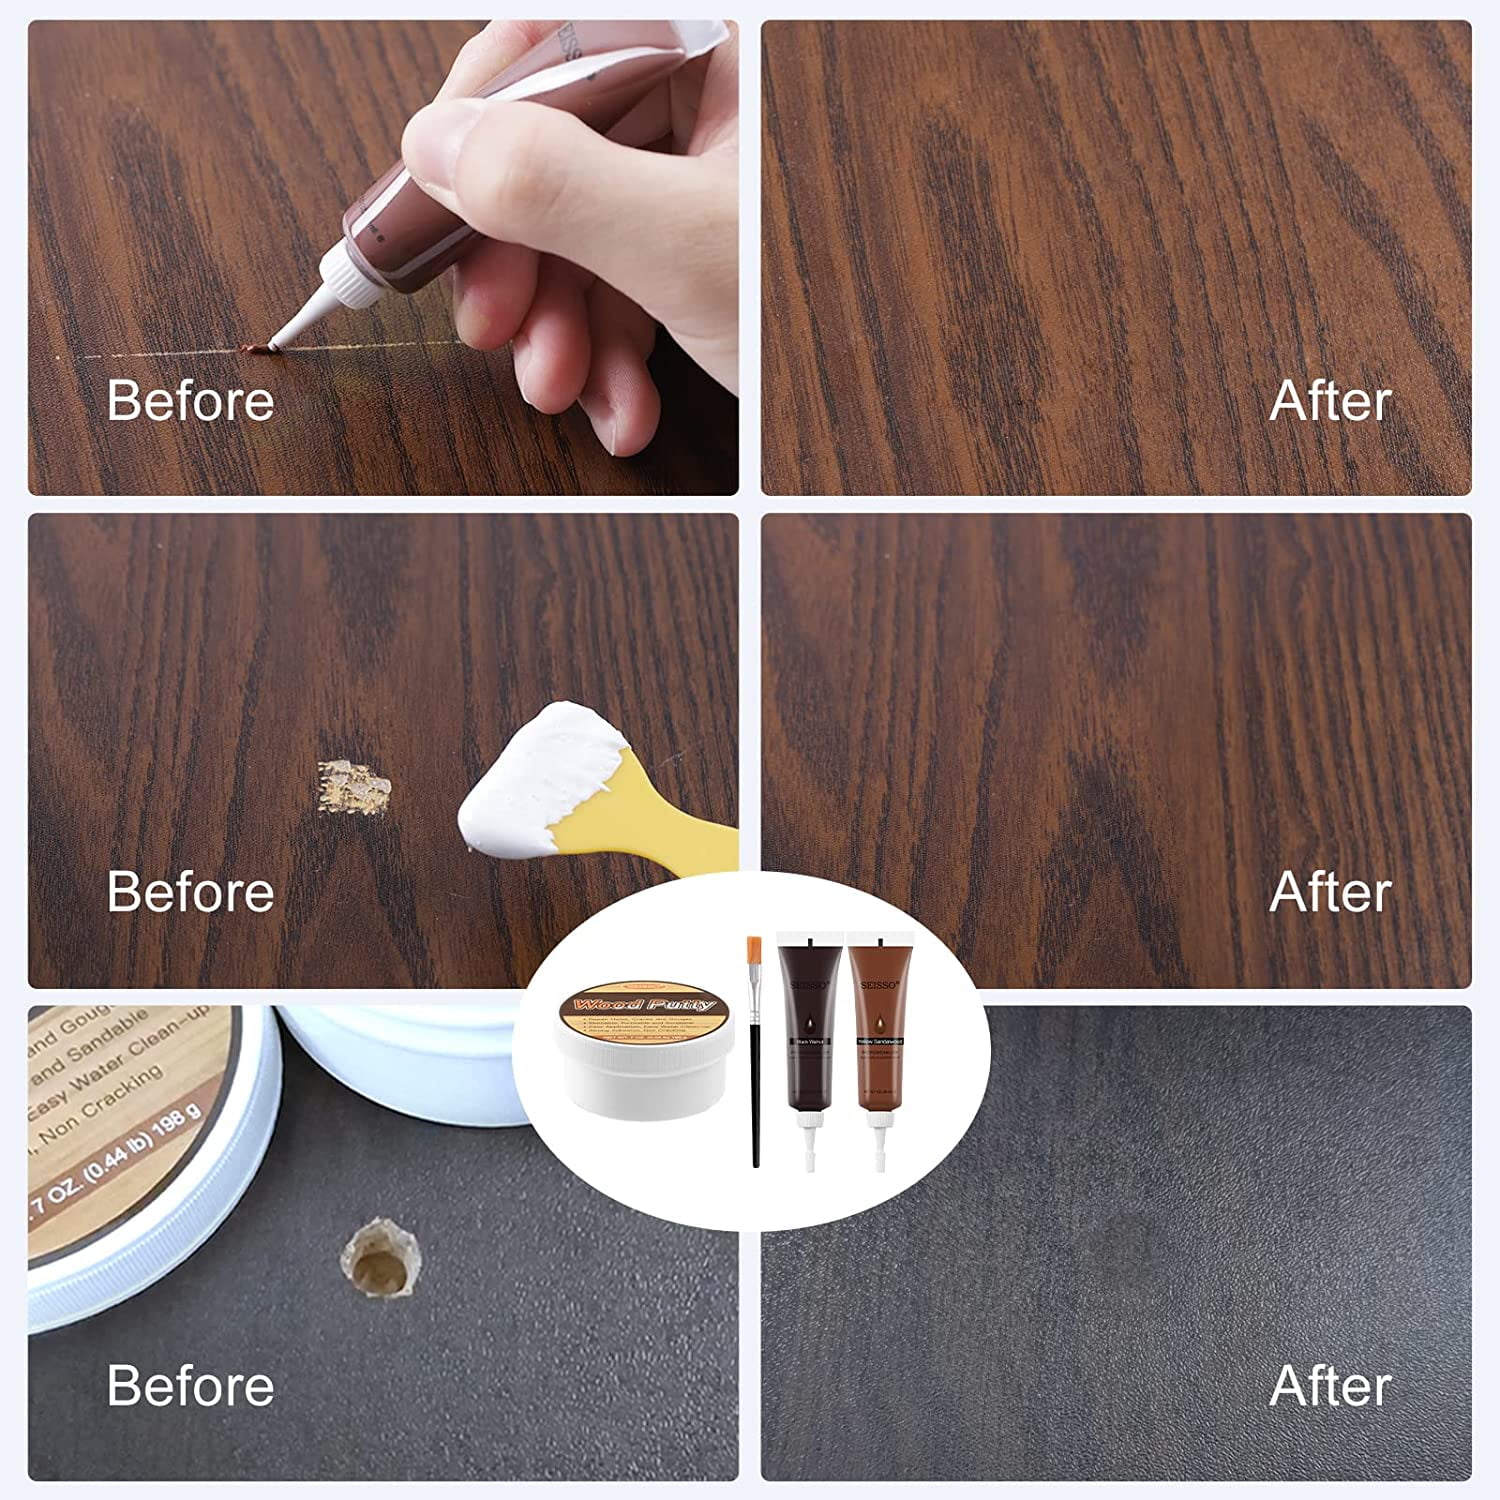 All-Purpose, Easy-To-Use Wood Filler Restores and Repairs Home Imperfections